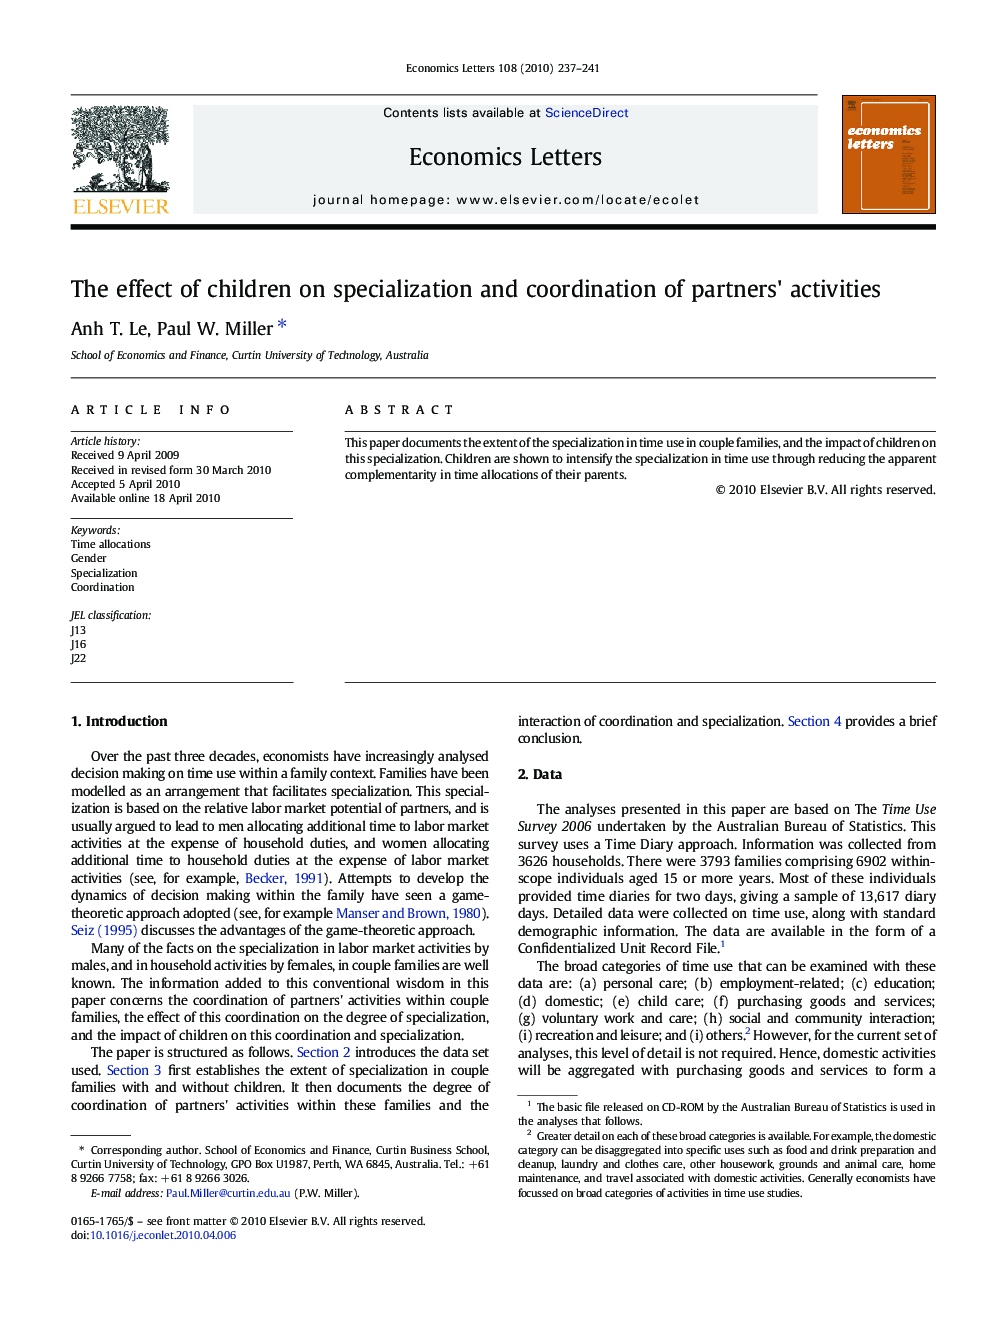 The effect of children on specialization and coordination of partners' activities